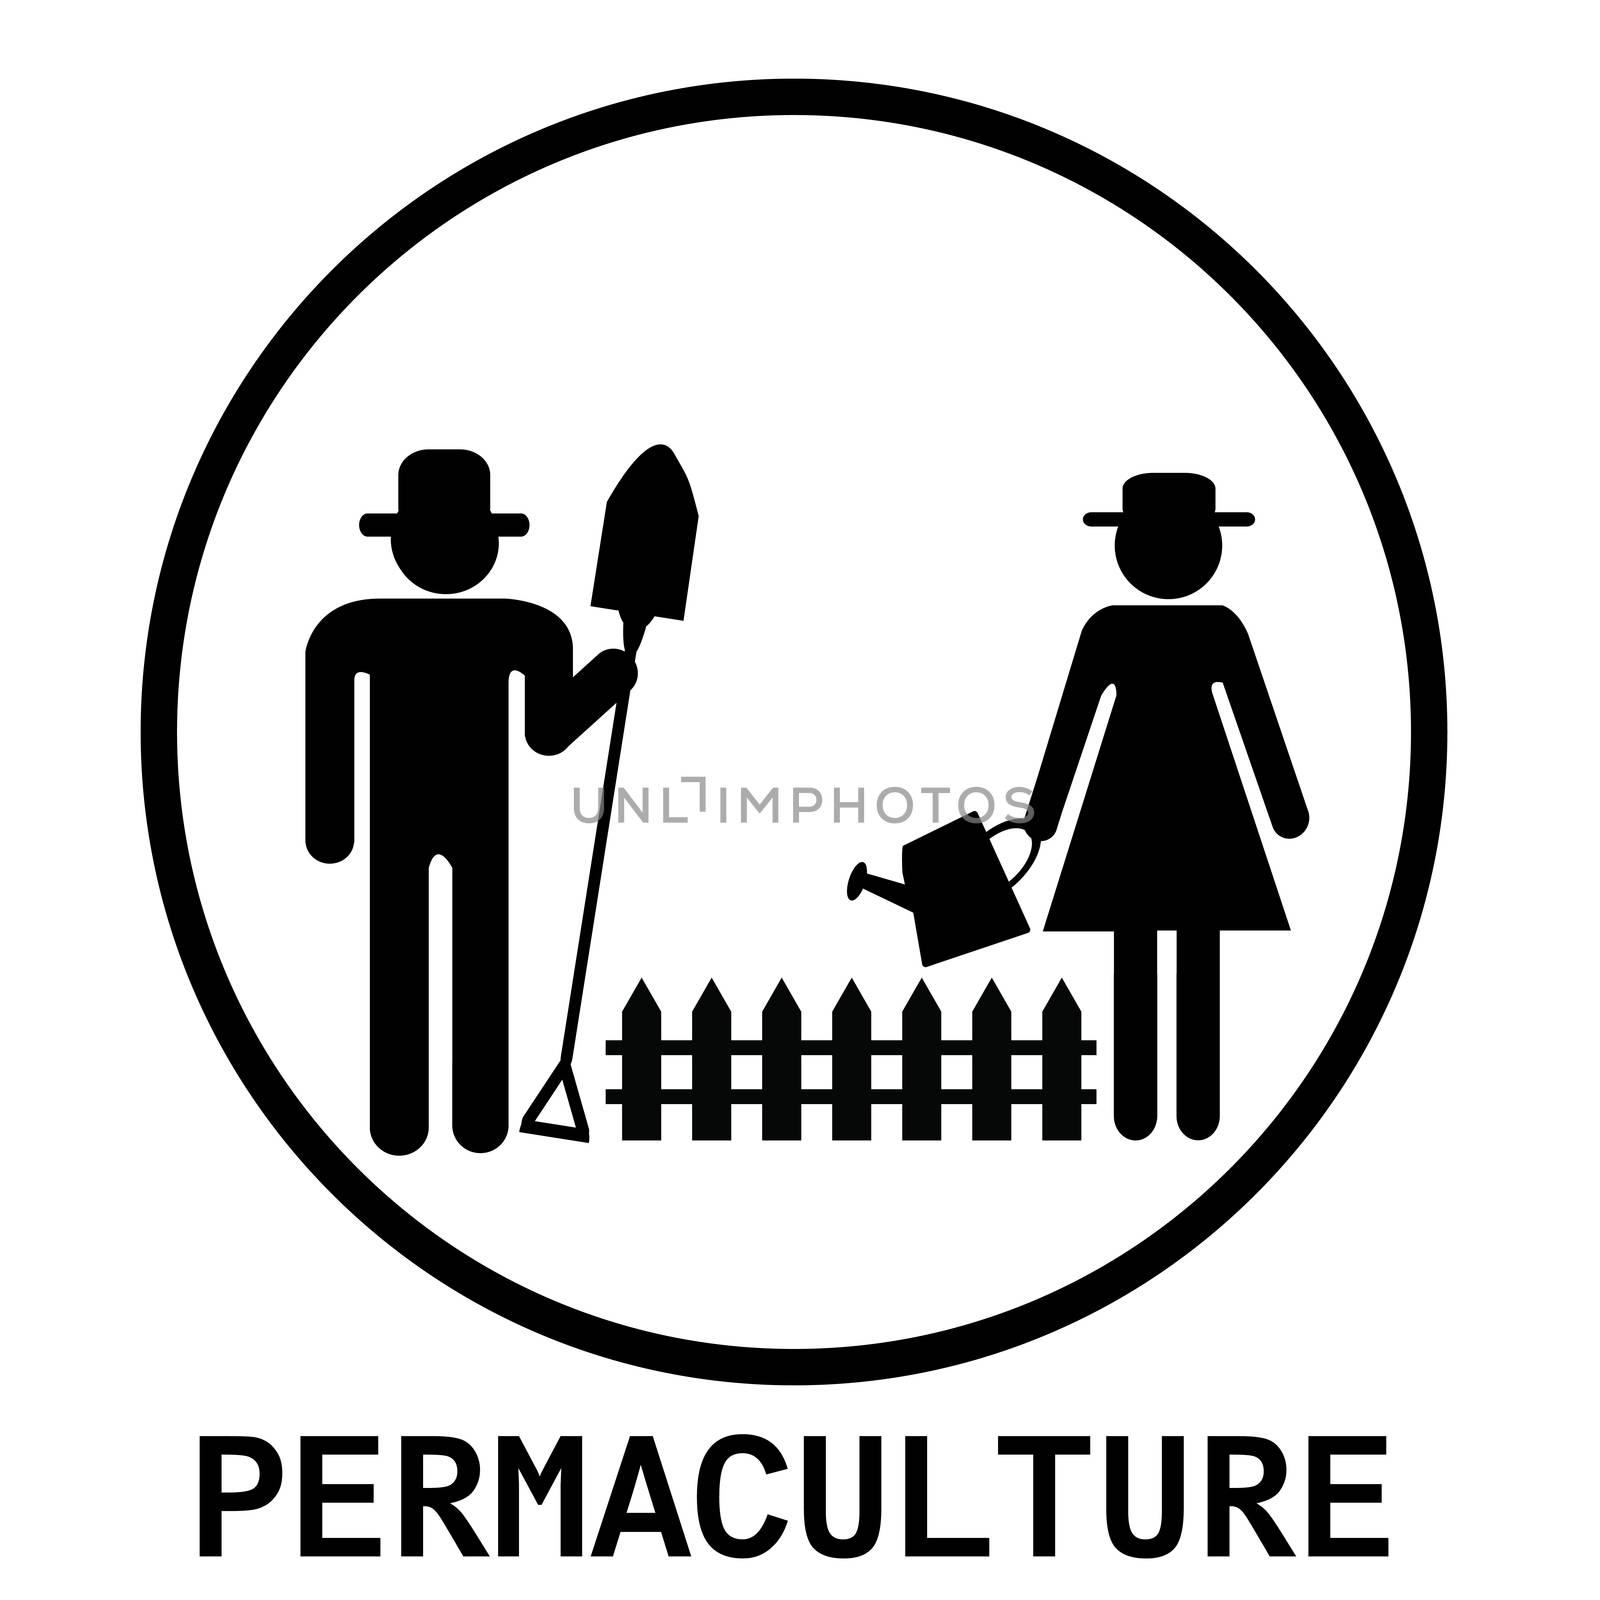 Permaculture design with garden workers by hibrida13